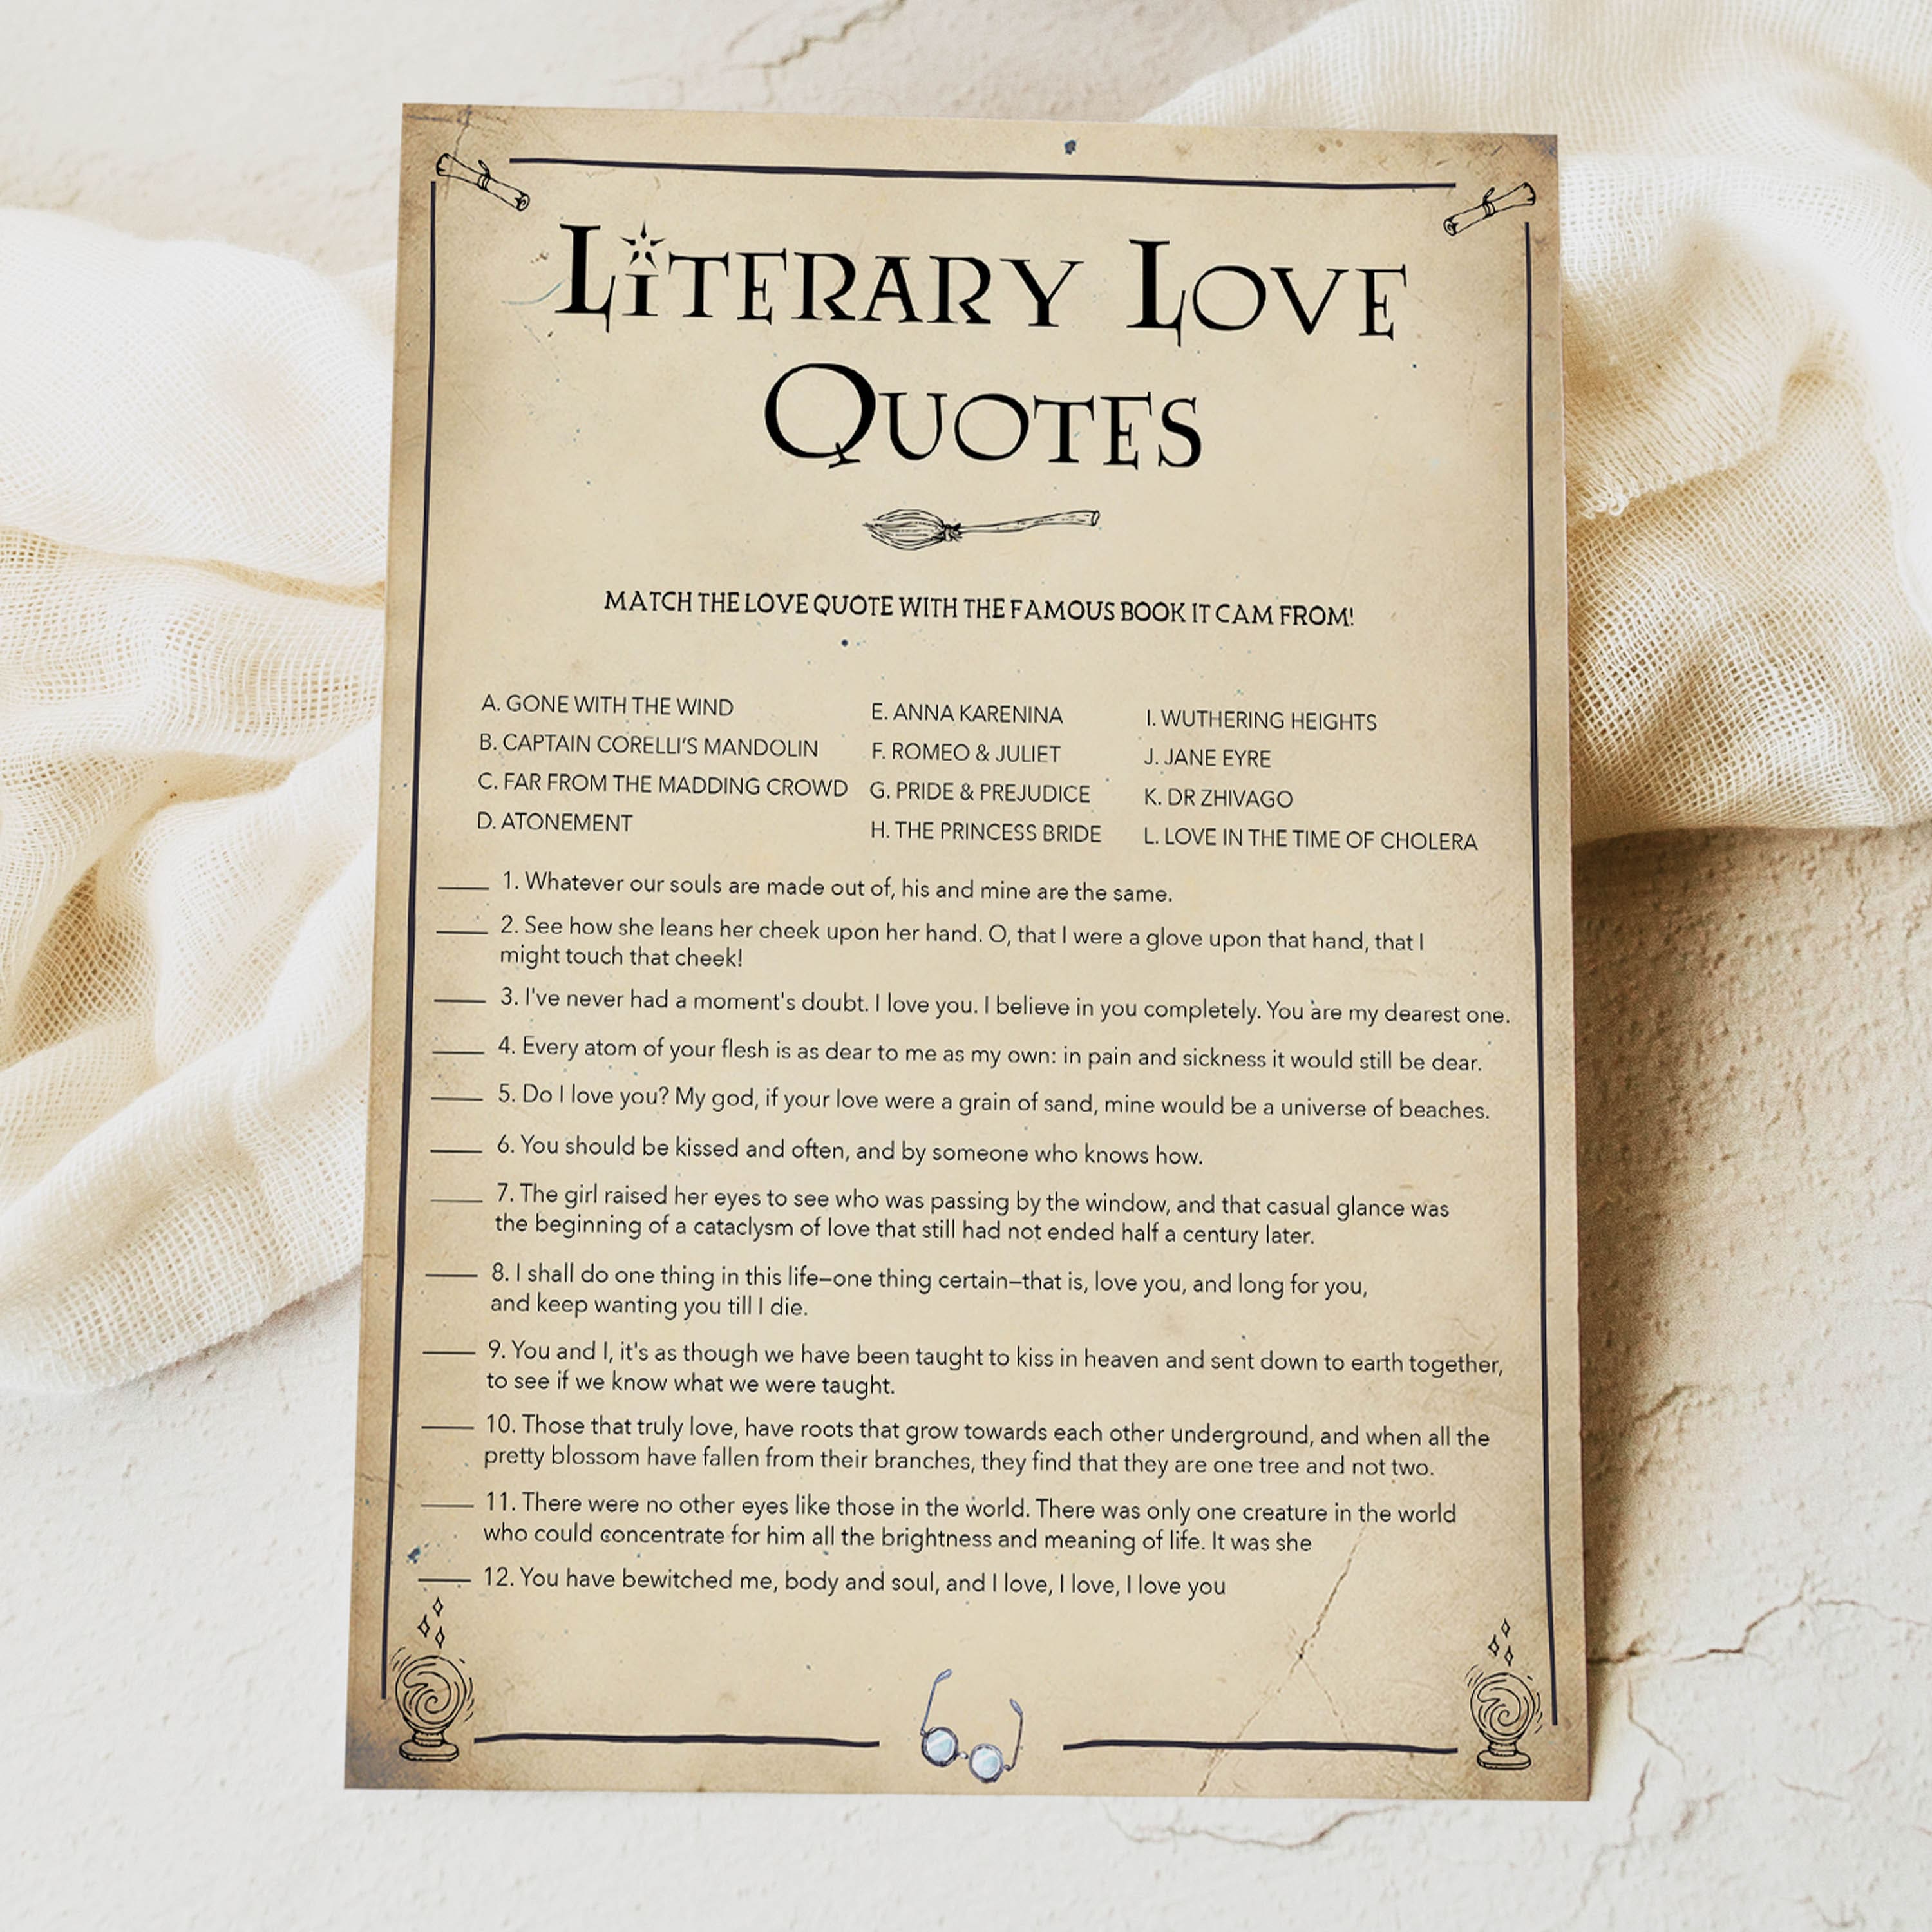 Bridal　Printable　–　Quotes　Literary　Games　OhHappyPrintables　Harry　Game　Love　Potter